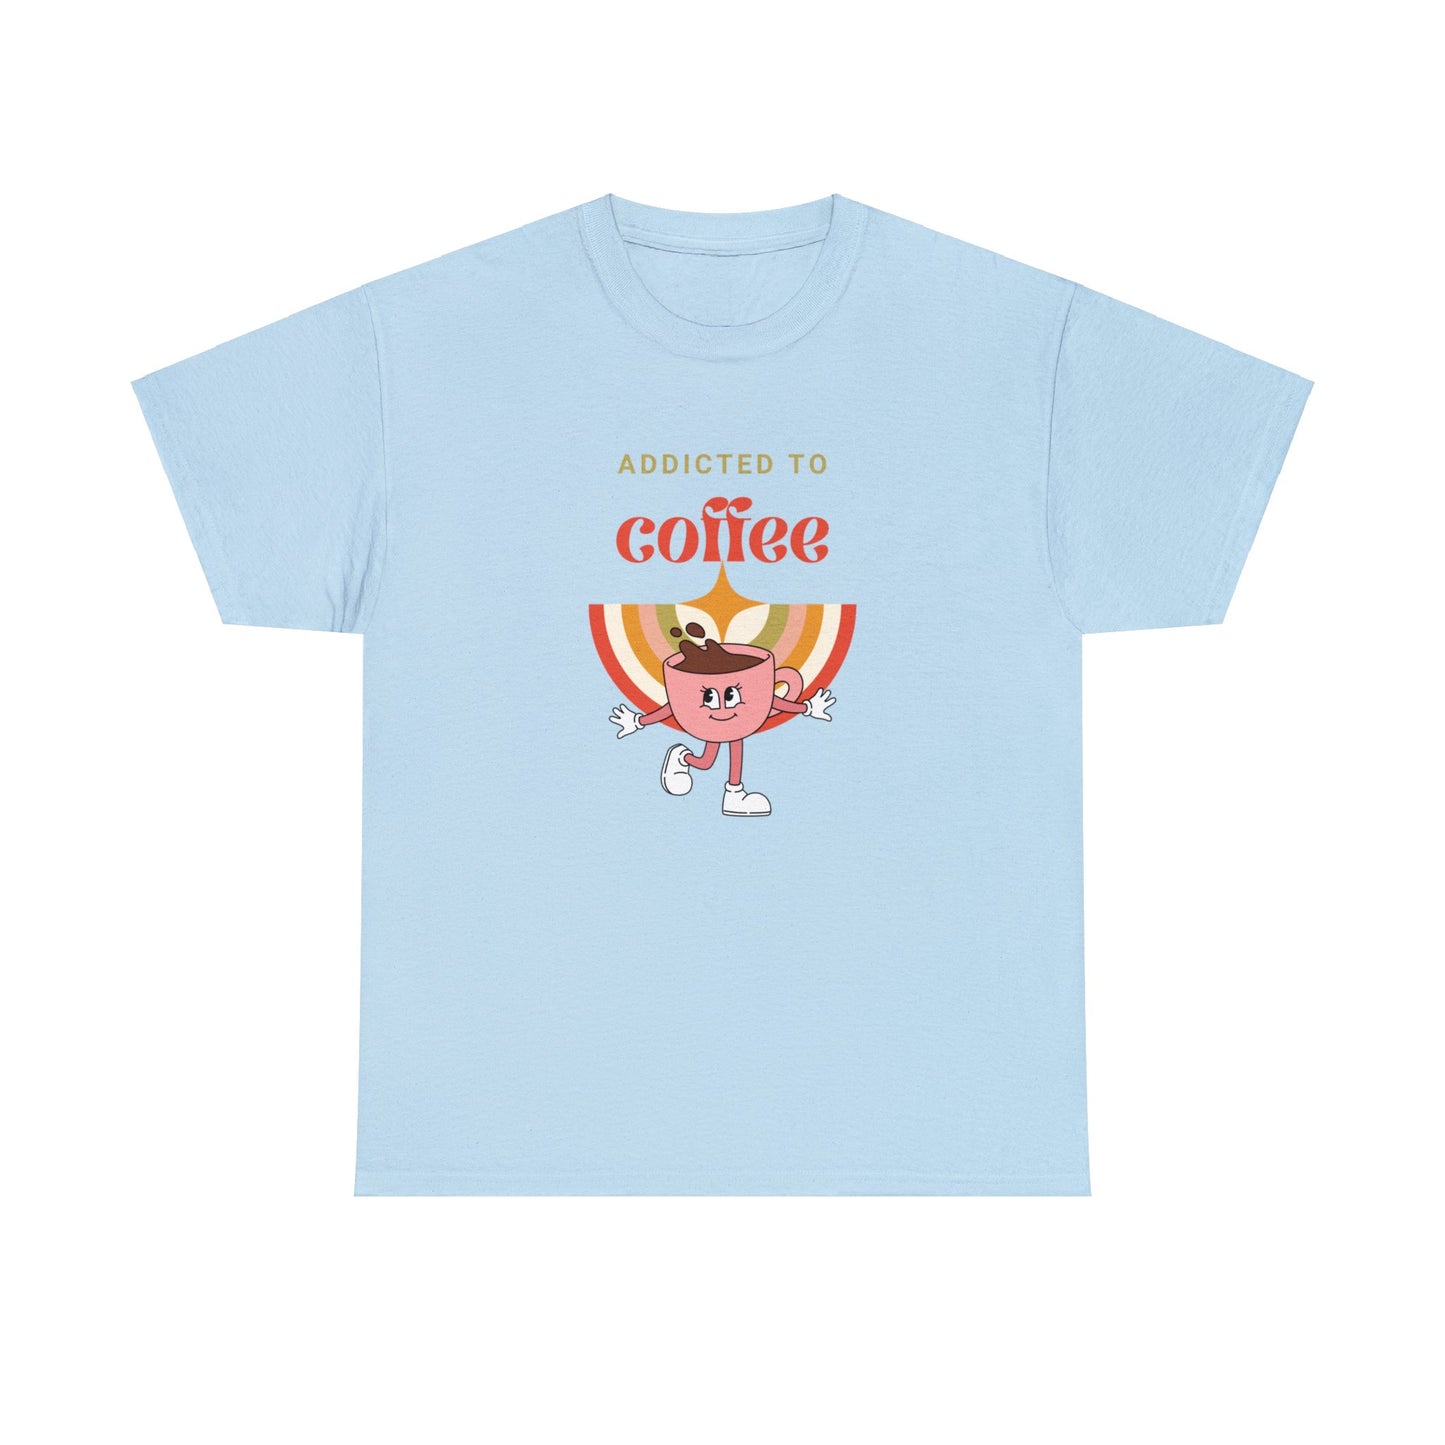 T-shirt ADDICTED TO COFFEE retro en anglais - adulte